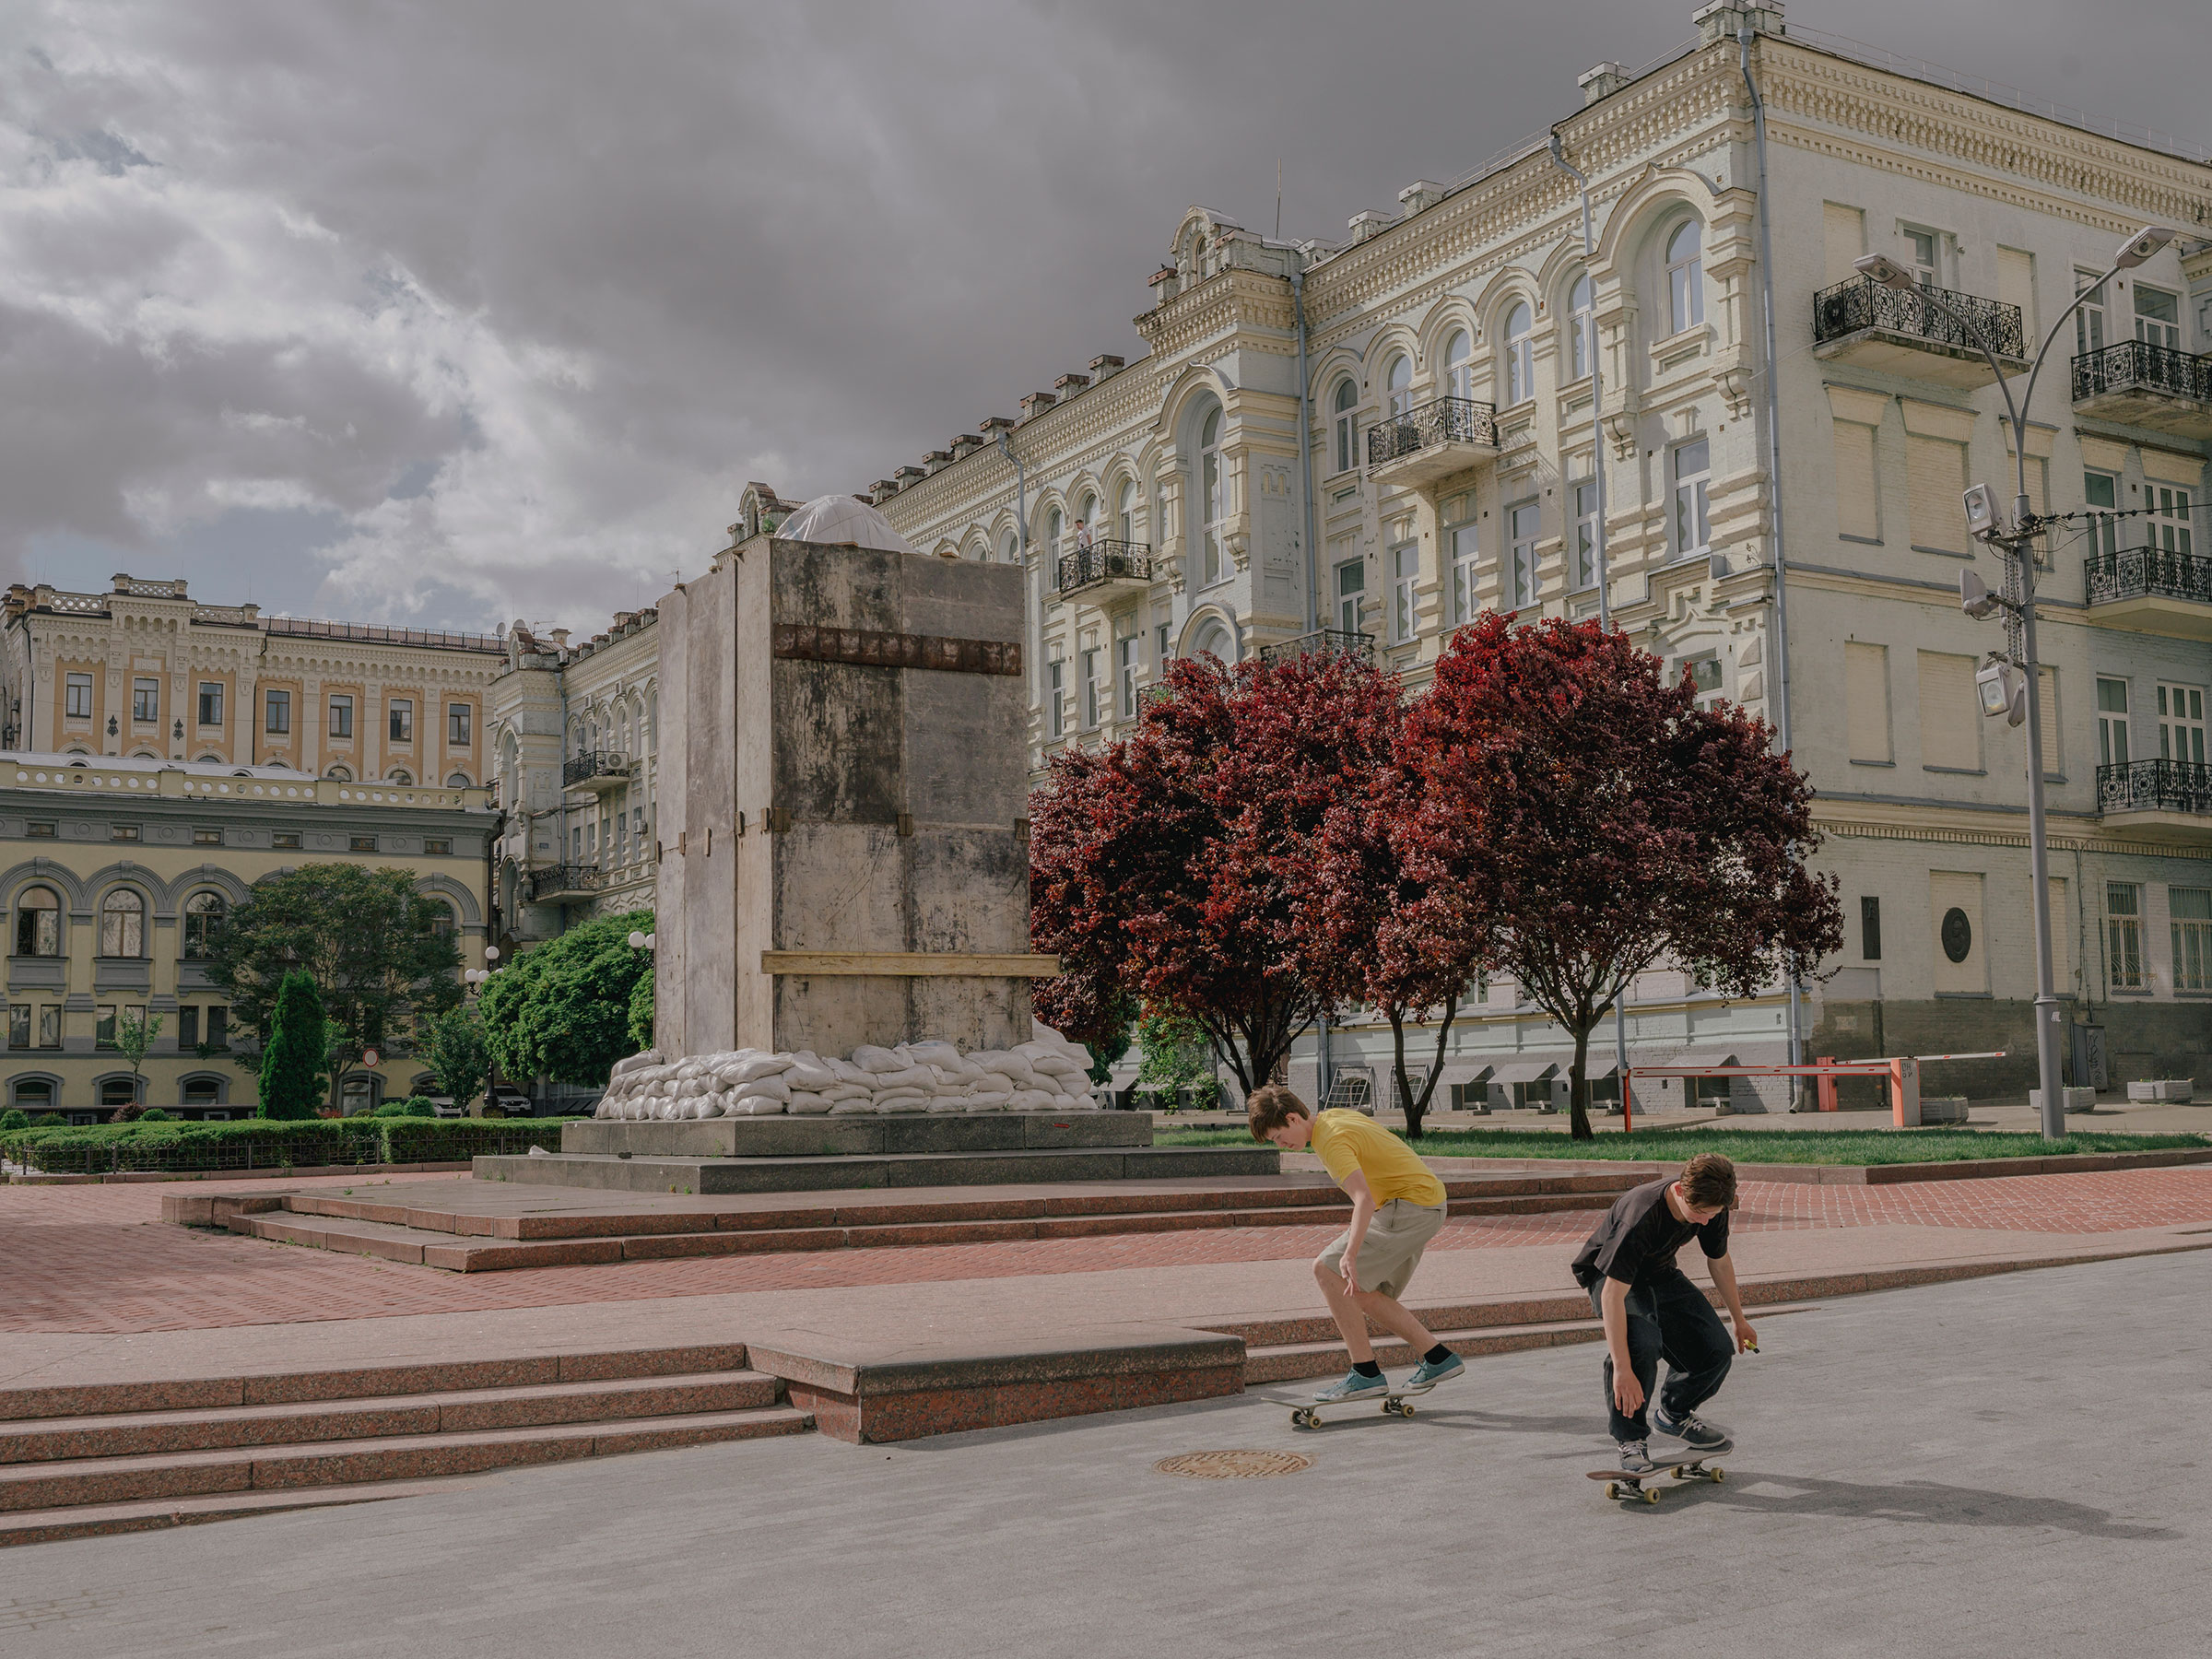 Skateboarders near the Kyiv Opera house, which reopened in late May after a three month closure. A monument in the background is still protected from possible air attacks by sandbags and panels. (Fabian Ritter—DOCKS Collective)